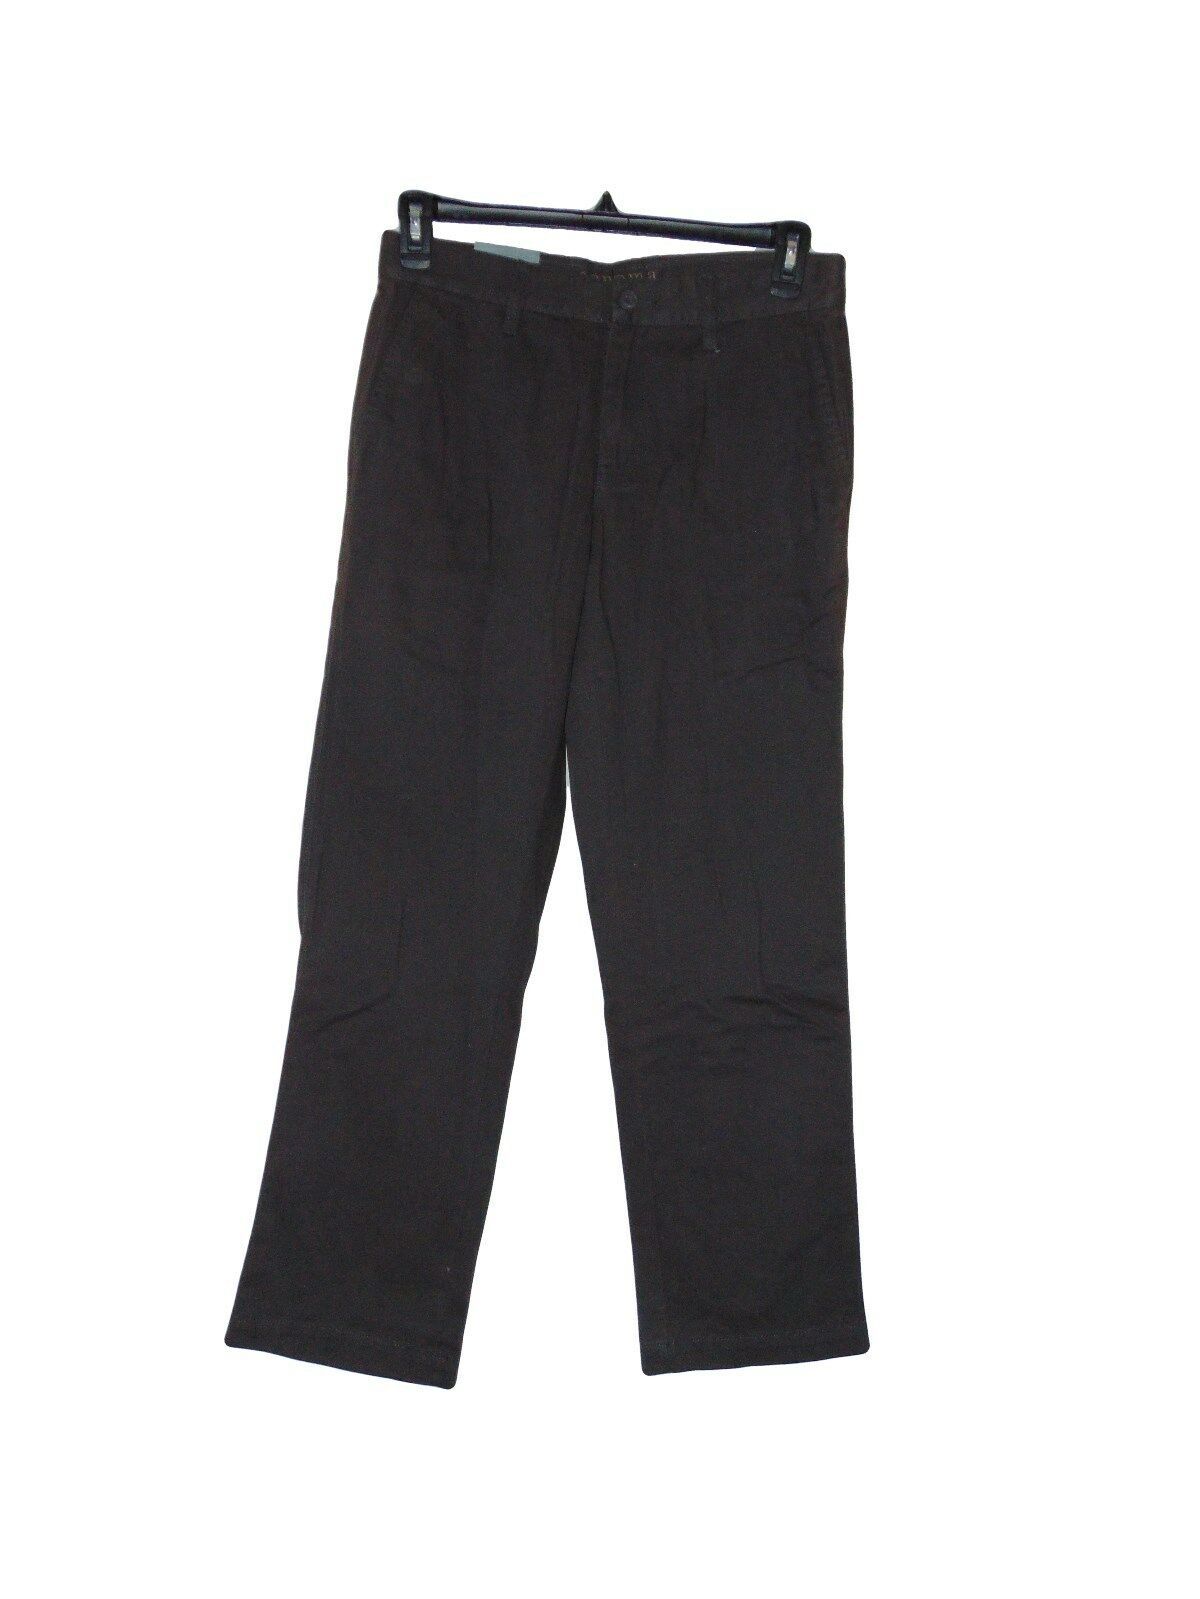 Sonoma Gray Pants Size 29 X 30 Nwt Straight Fit - Pants